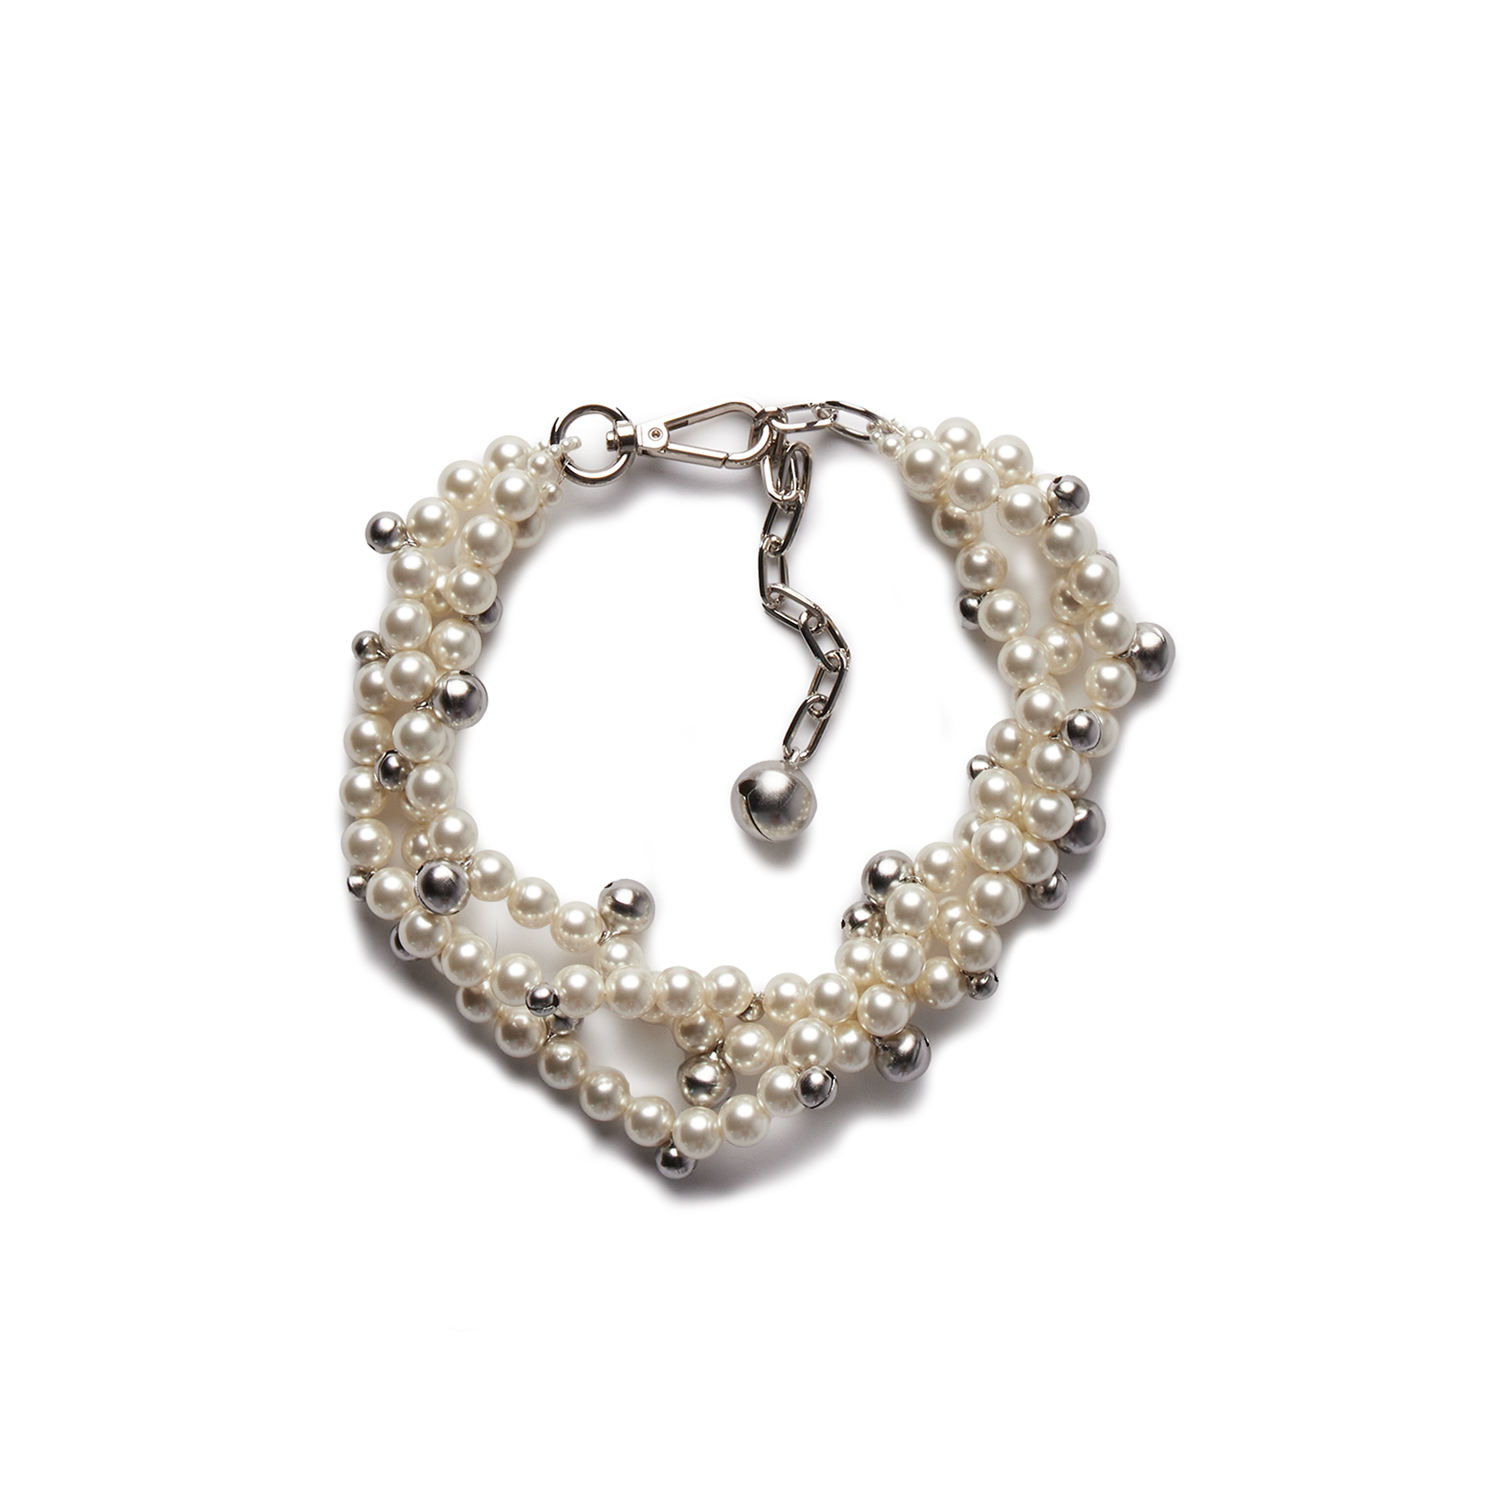 SIMONE ROCHA - Twisted Bell Charm & Pearl Necklace product image